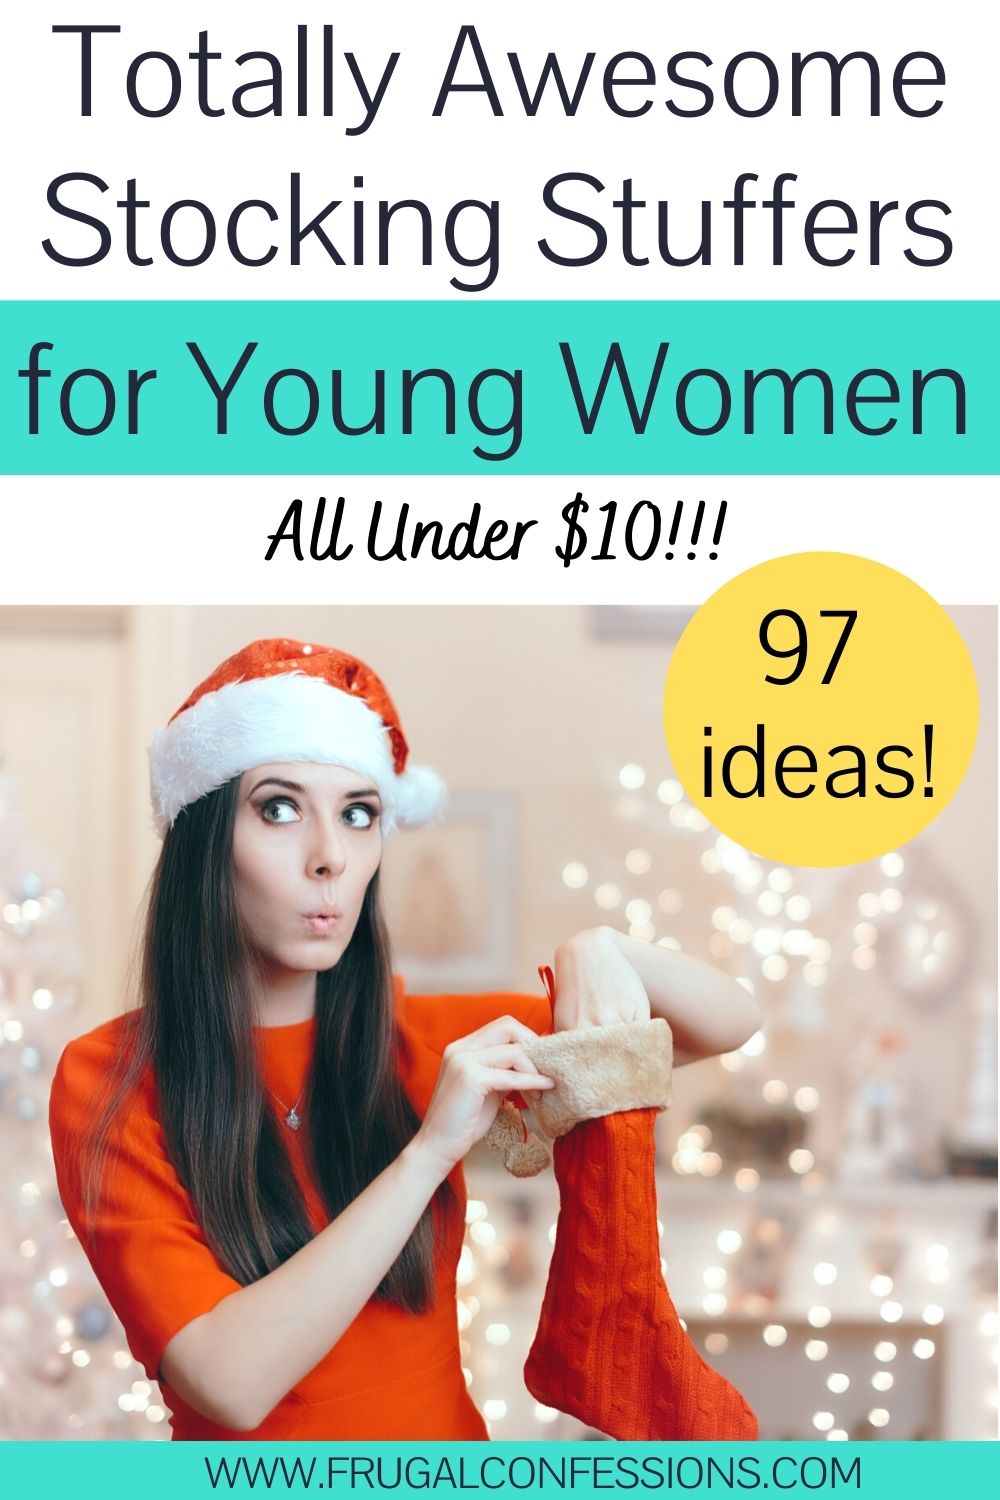 young woman with hand in red stocking, and excited look on face, text overlay "totally awesome stocking stuffers for young women all under $10"